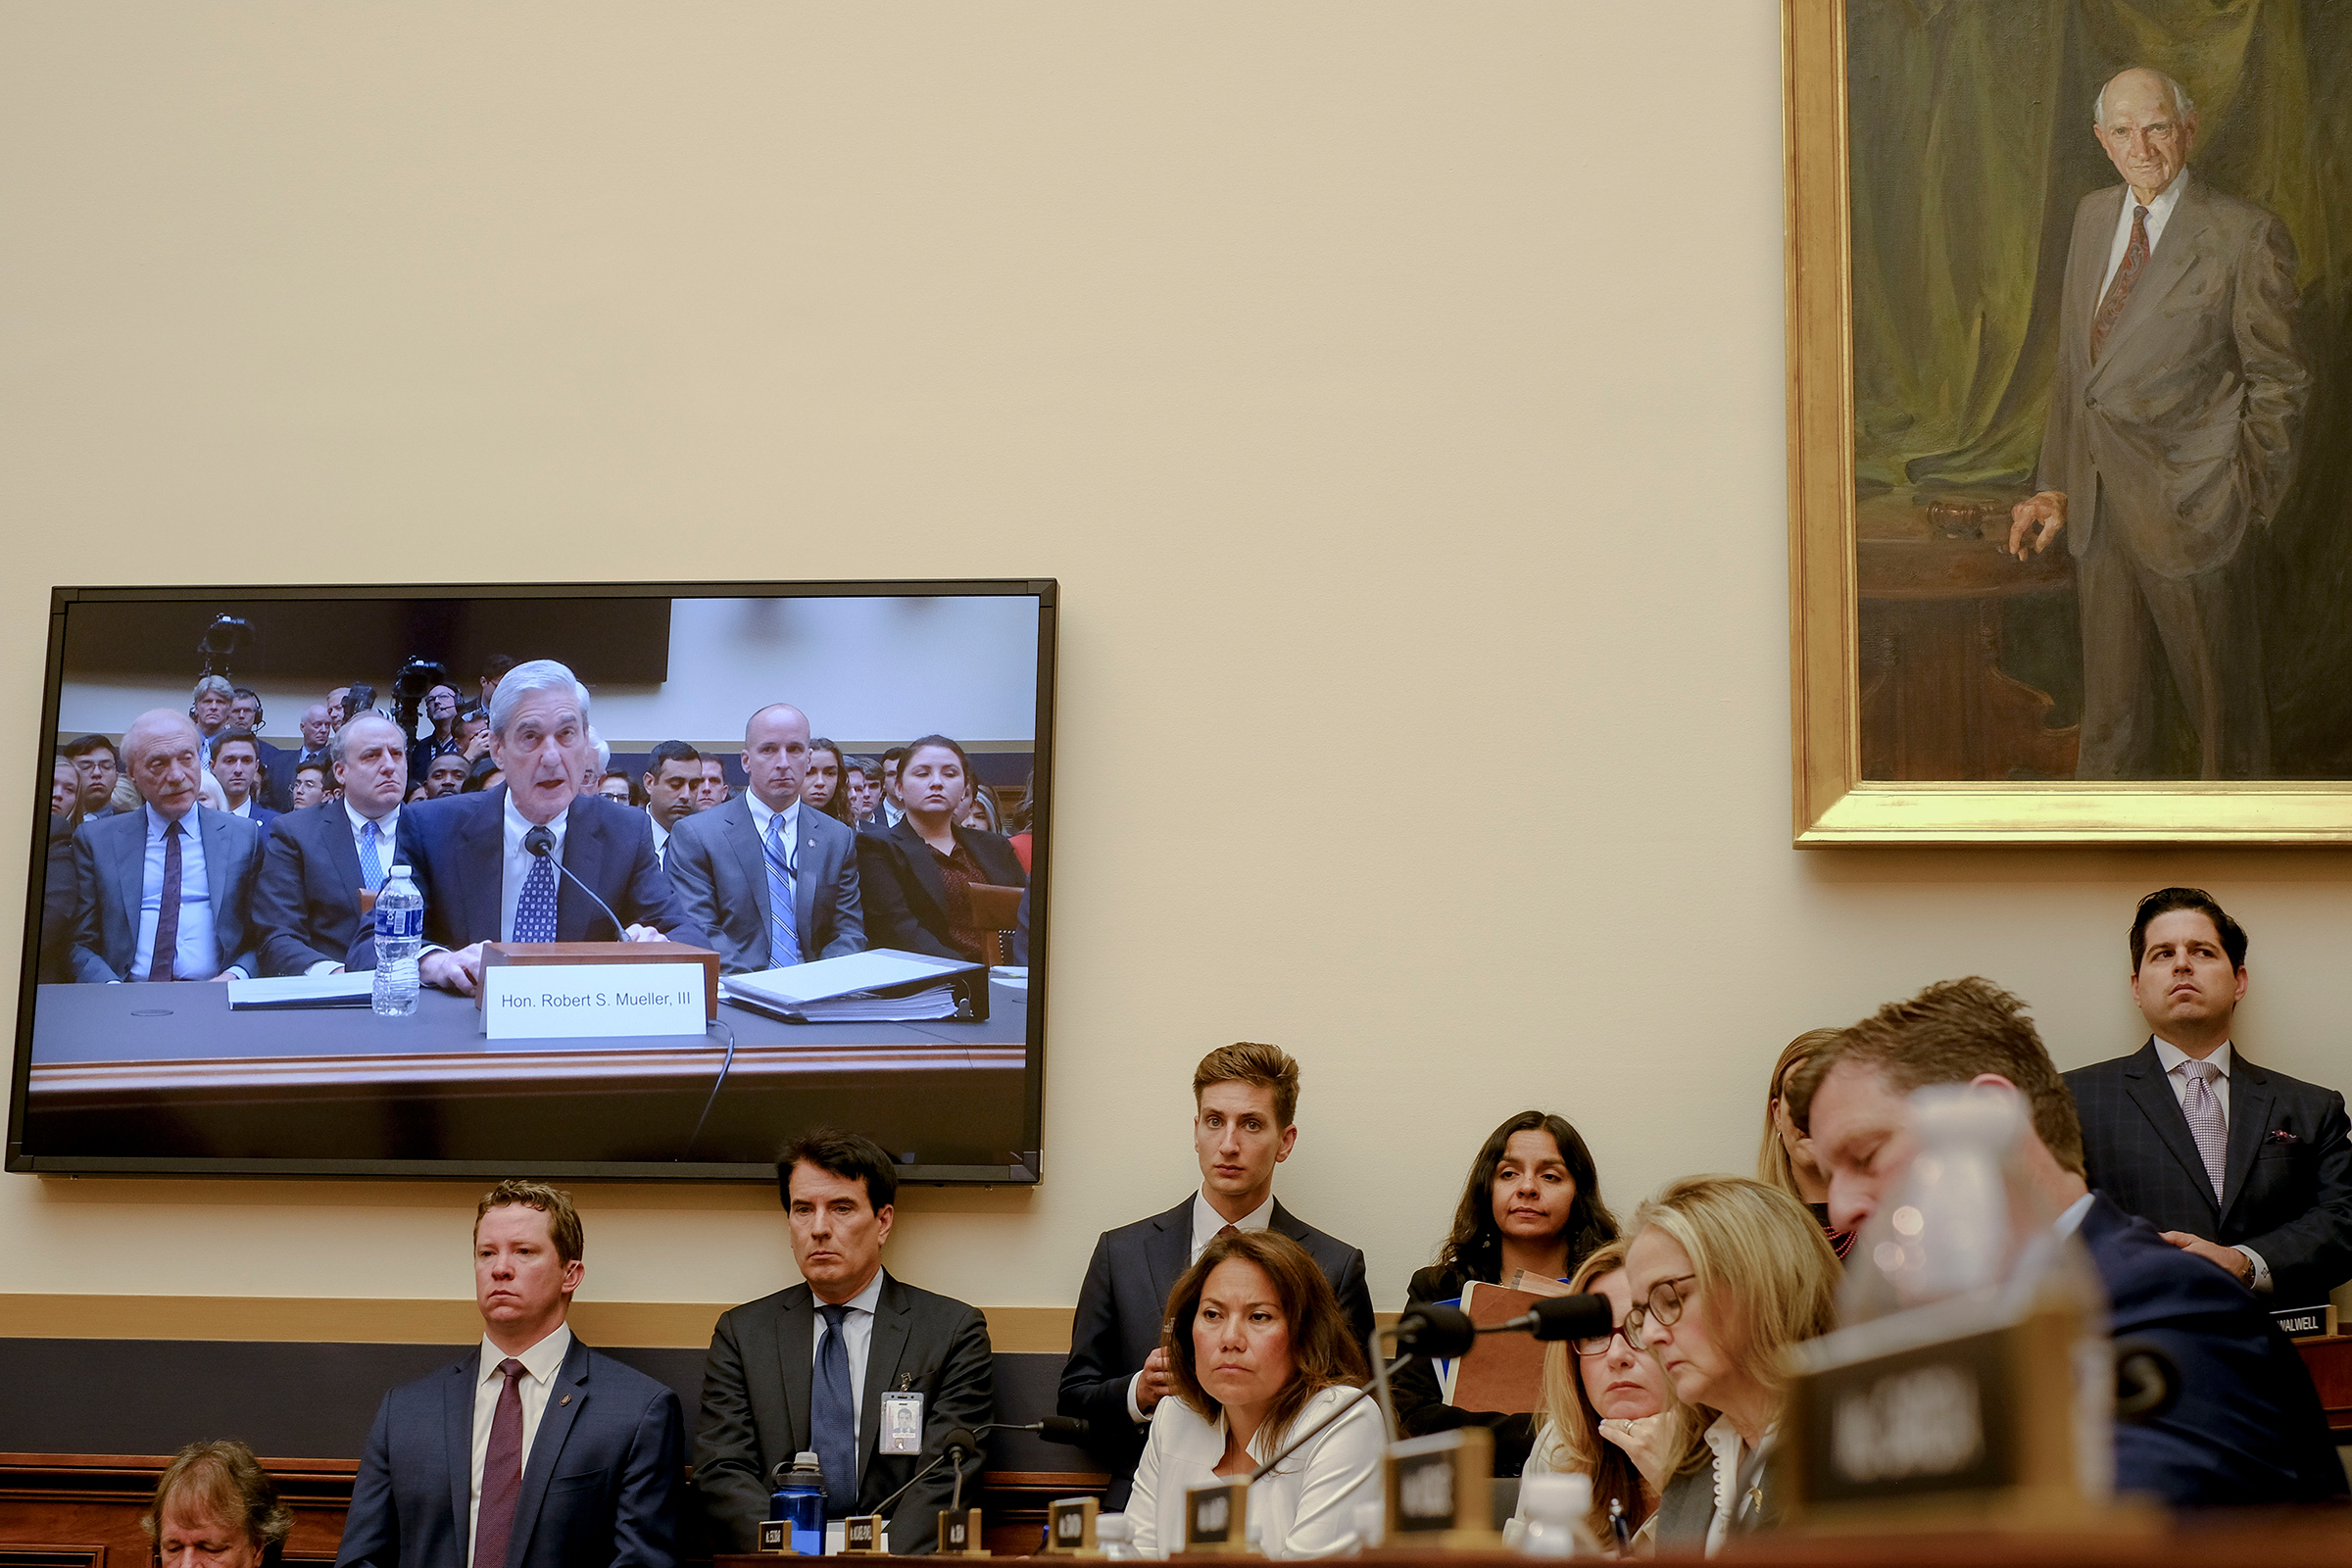 A television in the room broadcasts Mueller's testimony before the House Judiciary Committee. (Gabriella Demczuk for TIME)